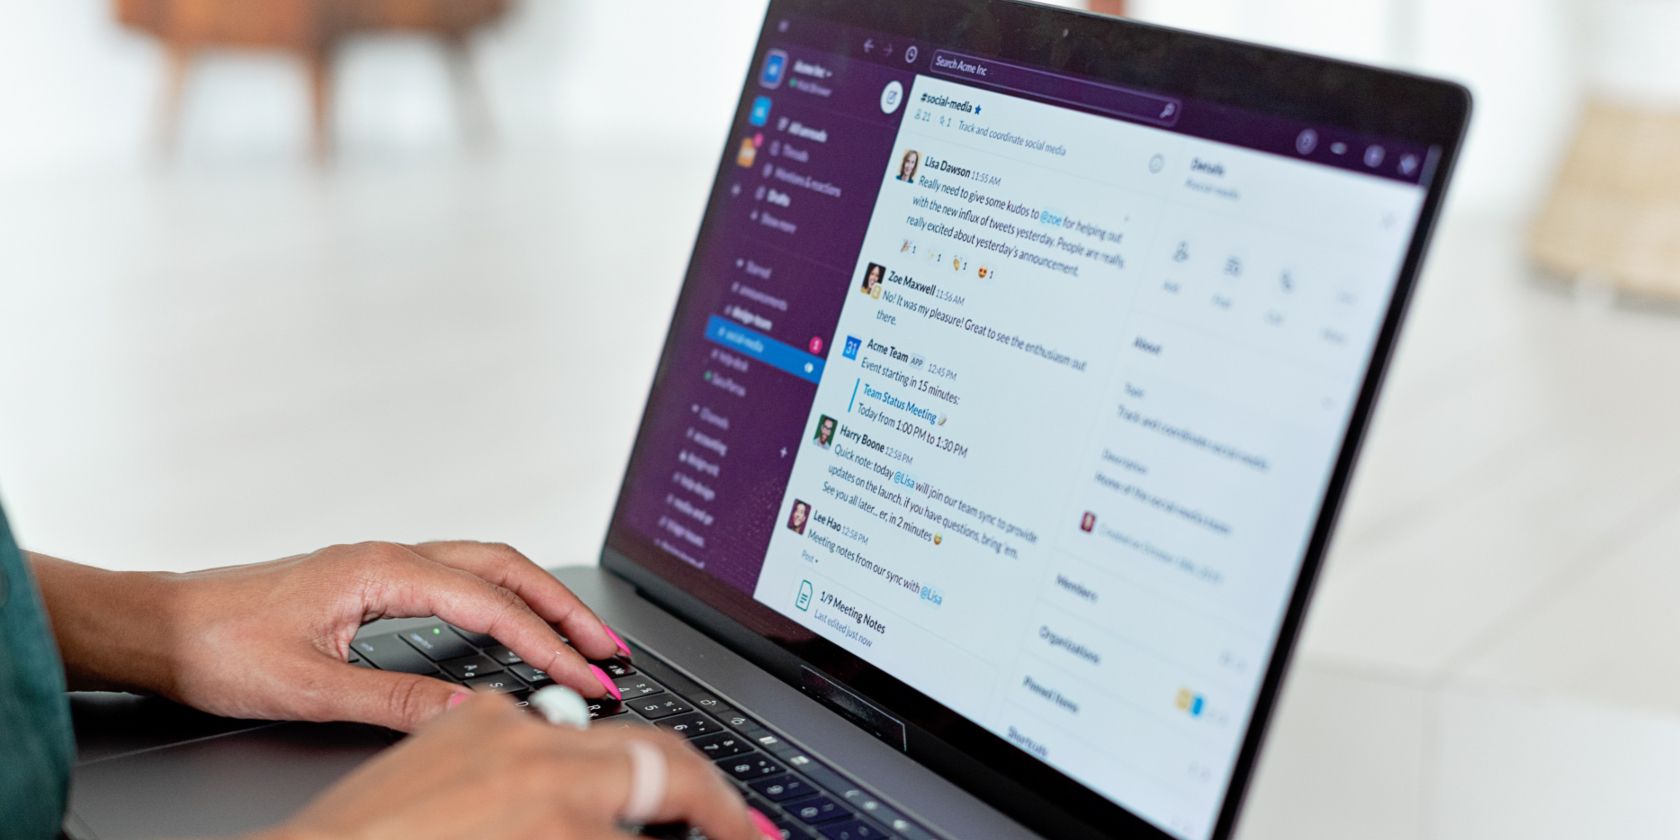 Image shows a woman using a laptop with Slack displayed on the screen